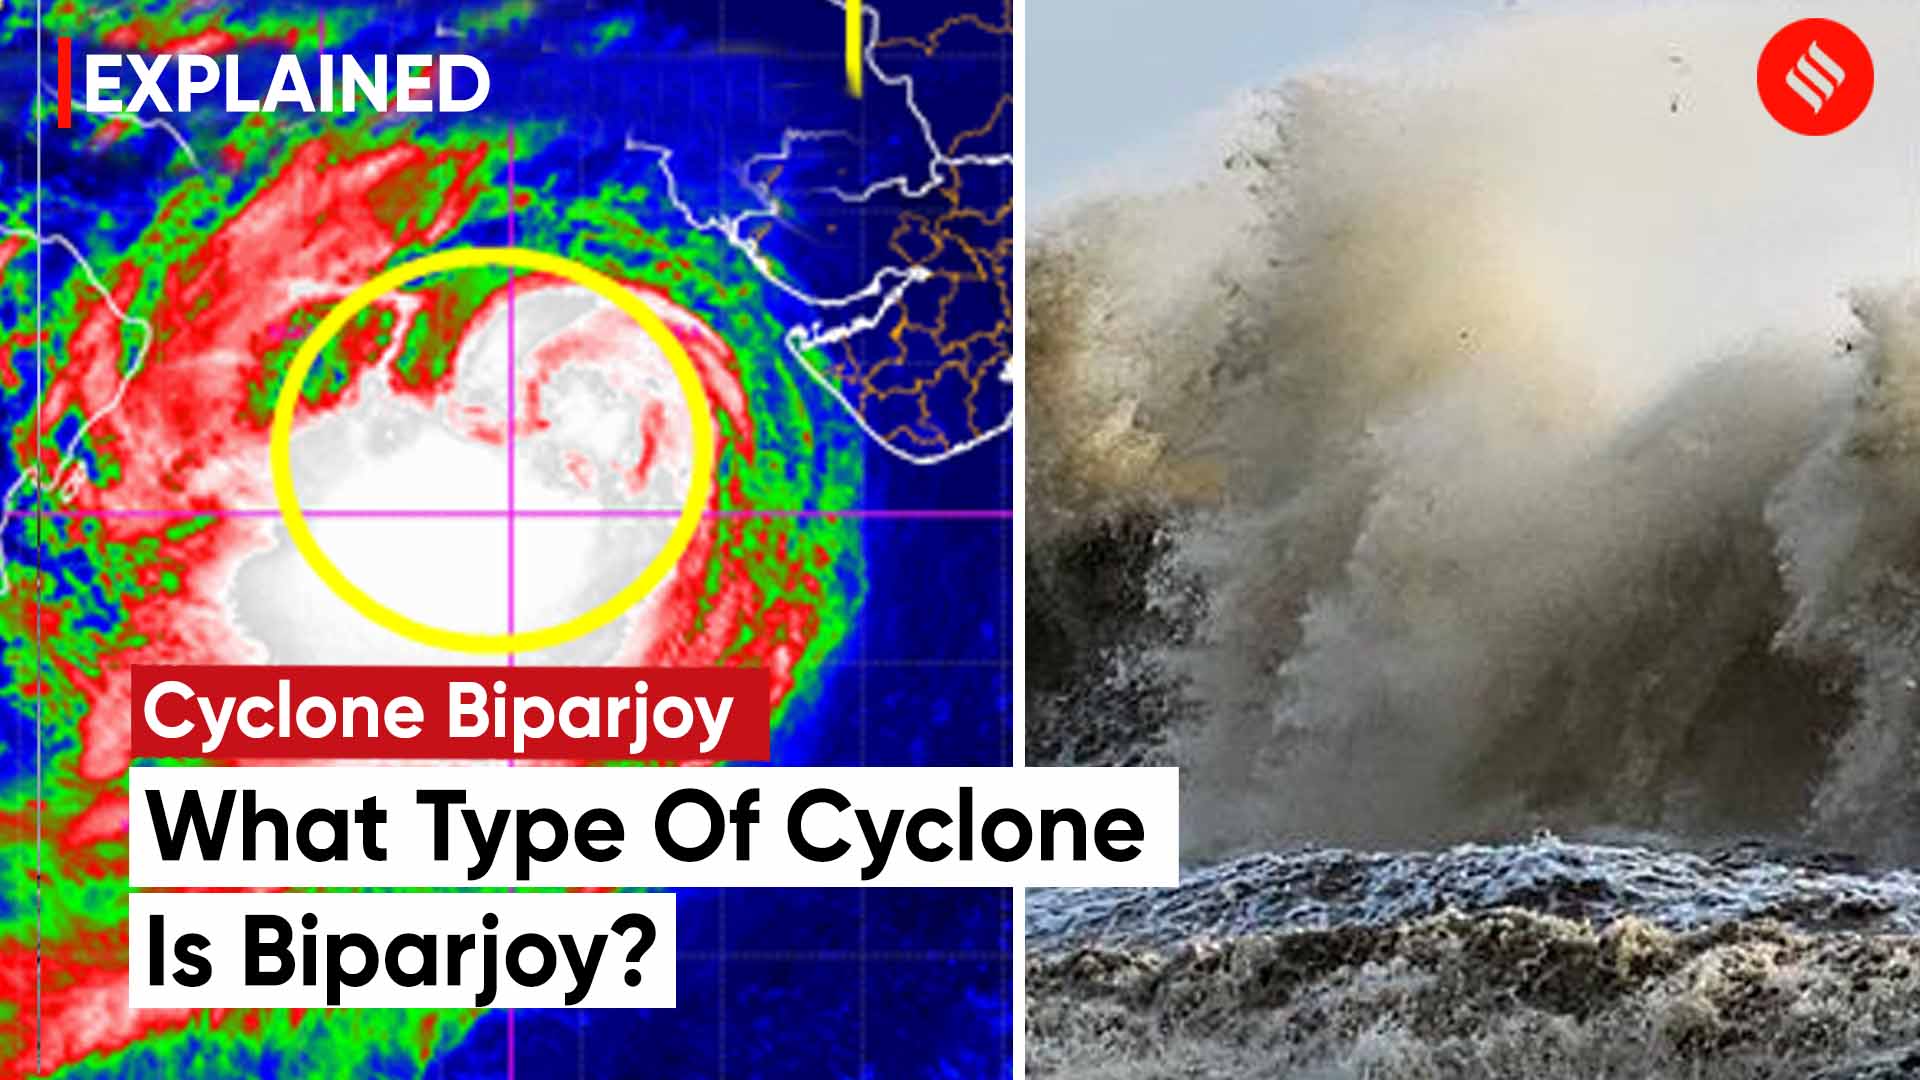 Express Explained What Type Of Cyclone Is Biparjoy And What Are The Different Types Of Cyclones